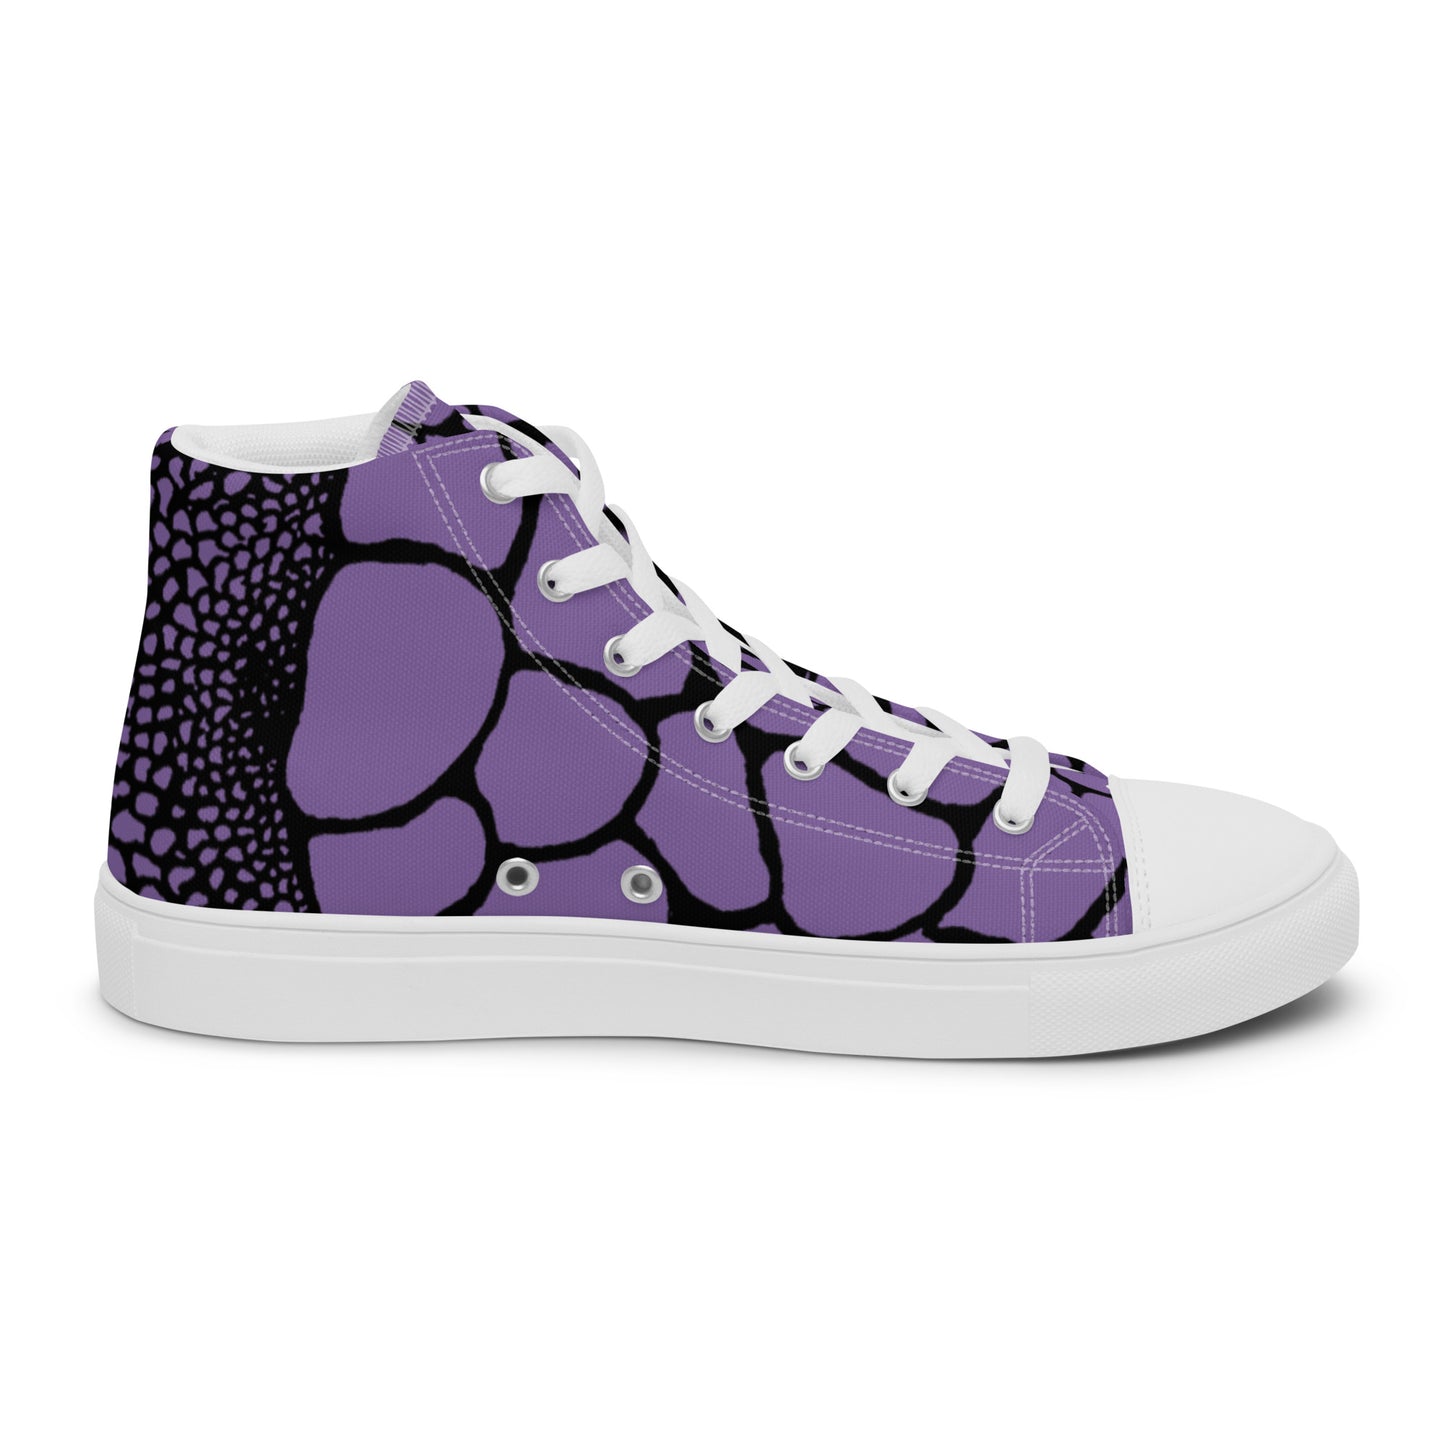 Organic Amethyst Purple Print Women’s High Top Canvas Shoes | Casual Print Shoes | Stylish Festival Sneakers | Abstract Shoes | Lace Up Sneakers | - Comfortable Culture - Shoes - Comfortable Culture